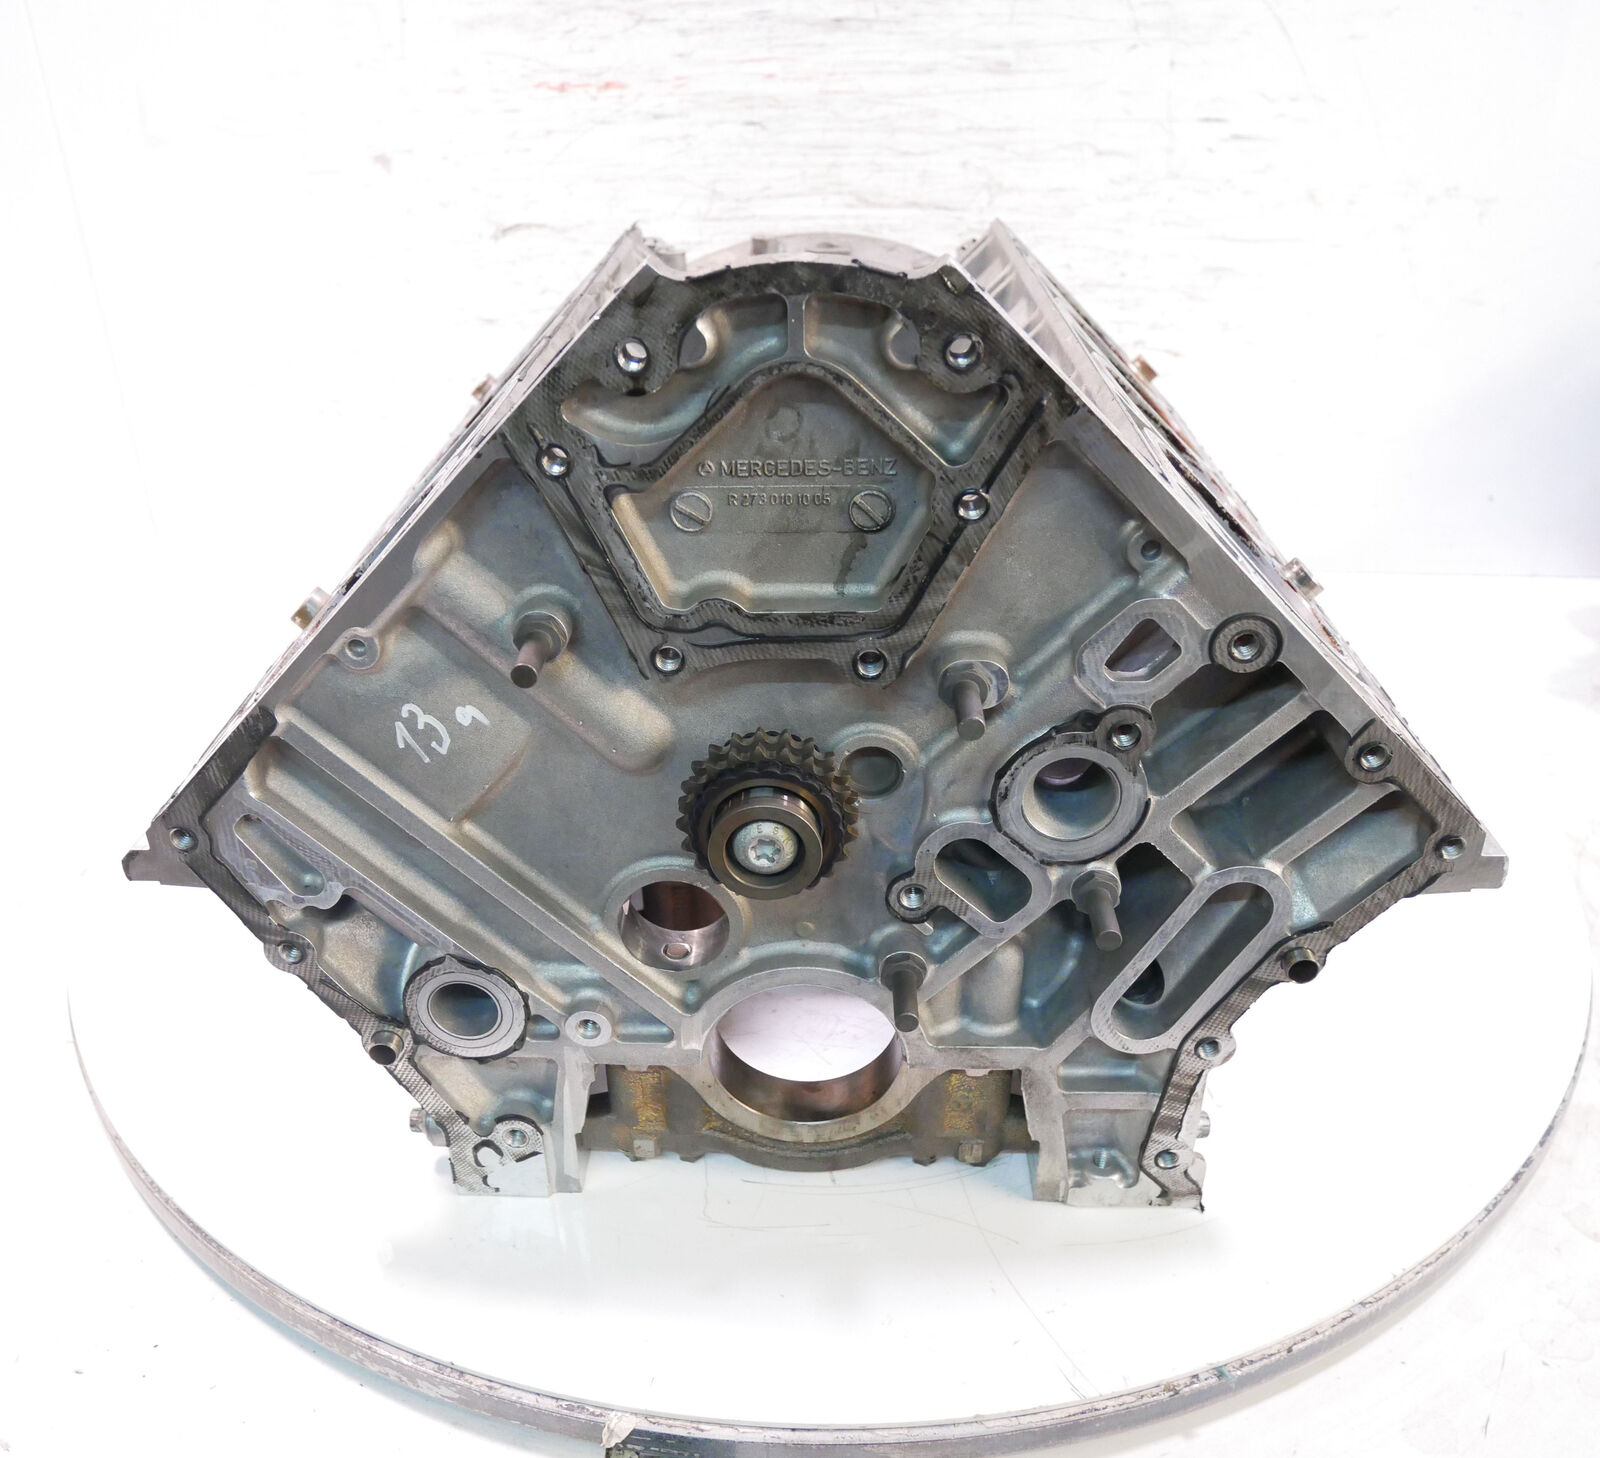 Engine block for 2011 Mercedes S-Class S500 5.5 V8 273.961 388HP